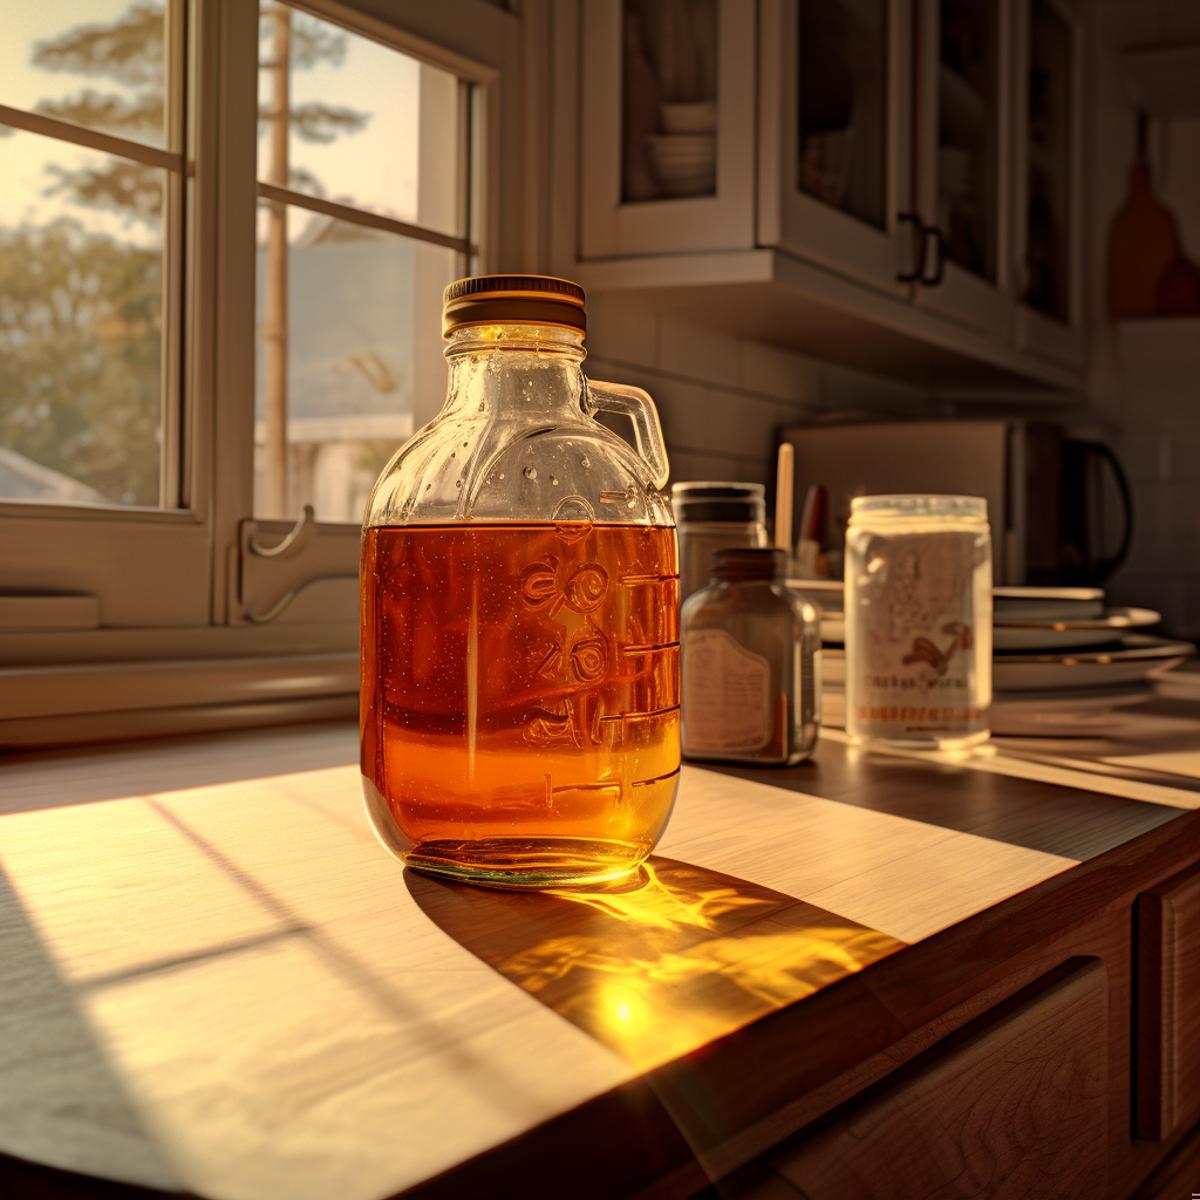 Honey on a kitchen counter